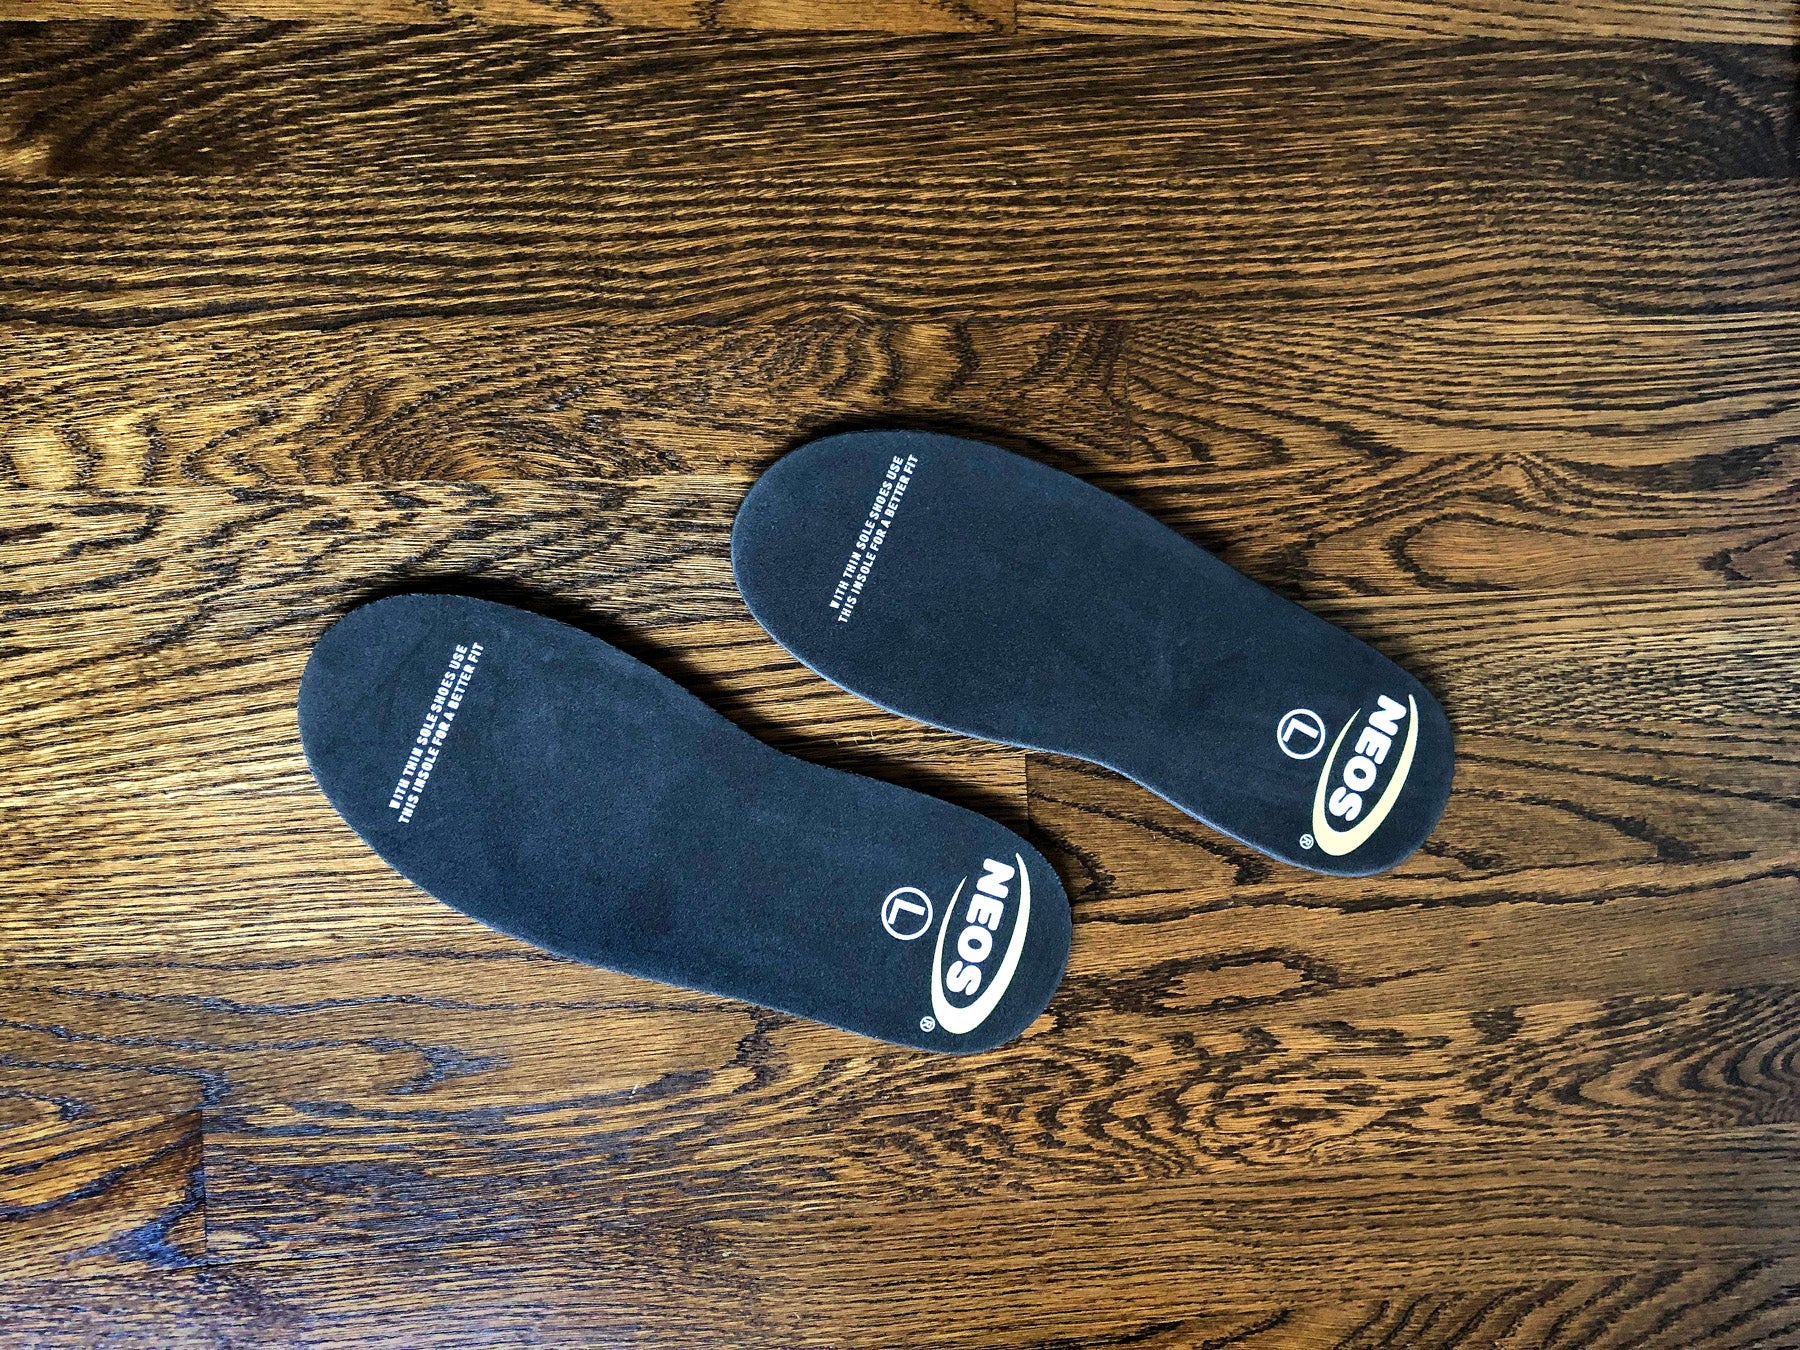 Why Use EVA Insoles In Your Overshoes?